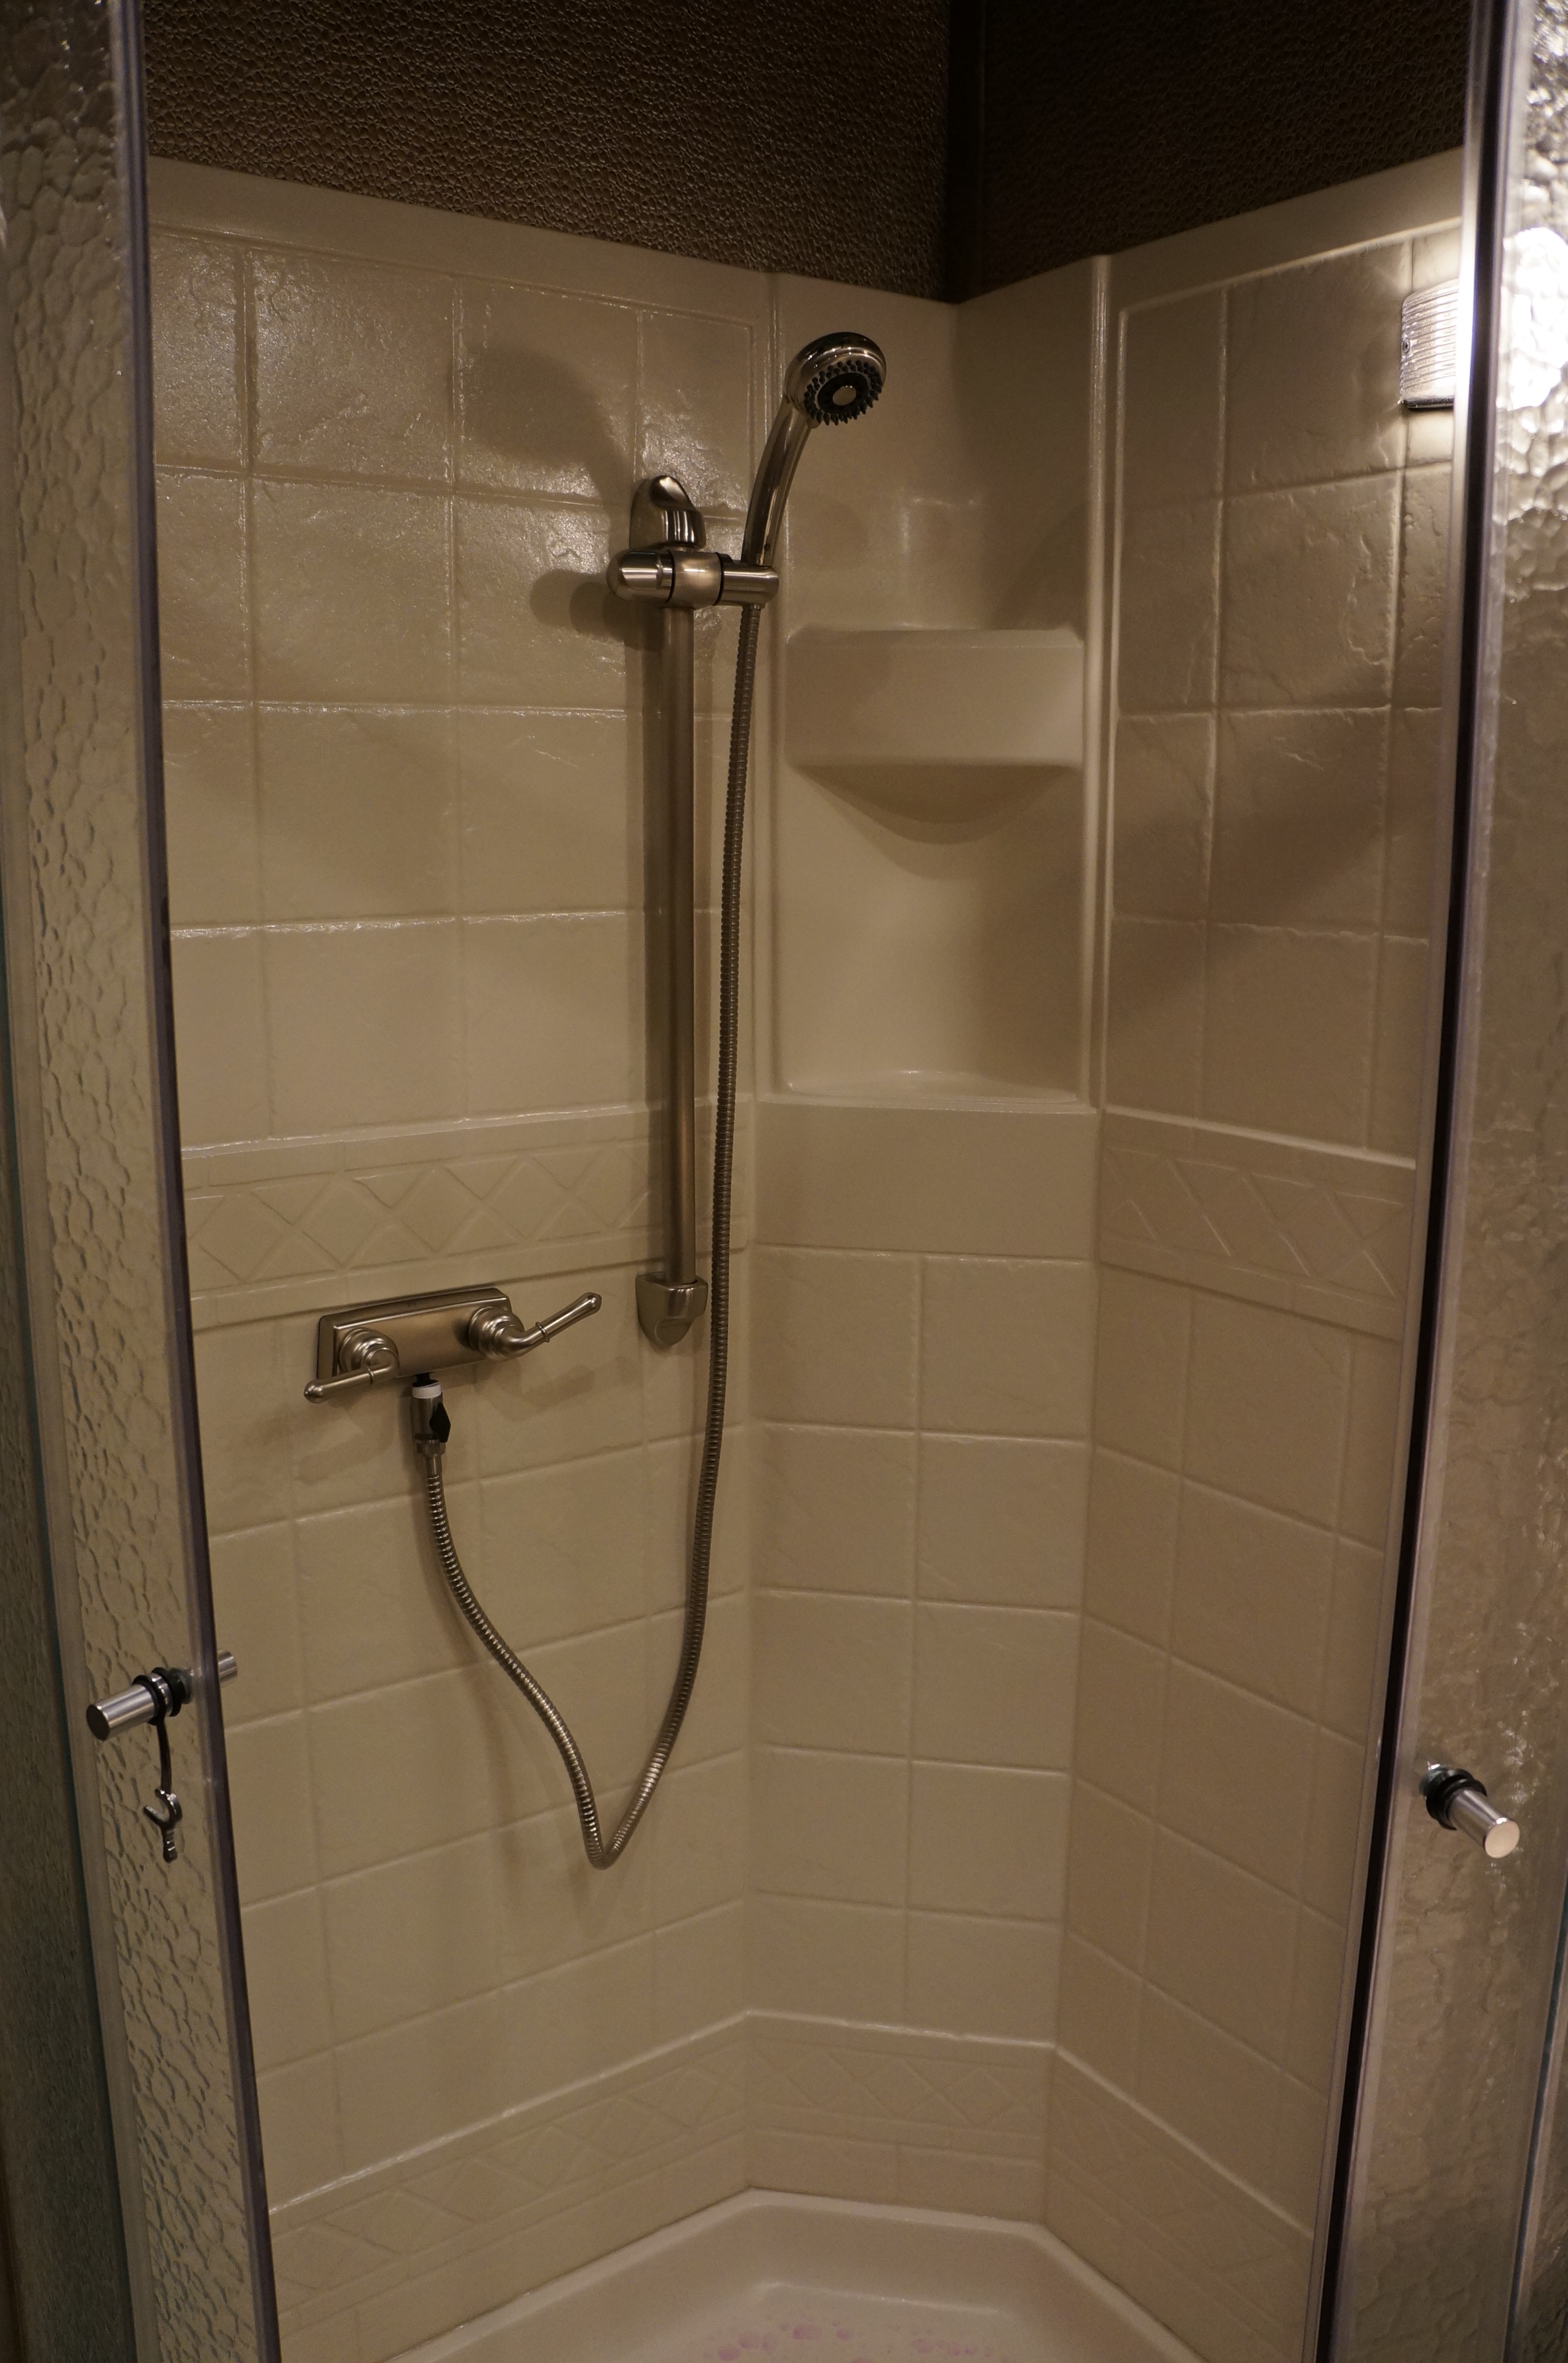 Almond Shower with Silver Faucet  & Shower Head on Slider Bar